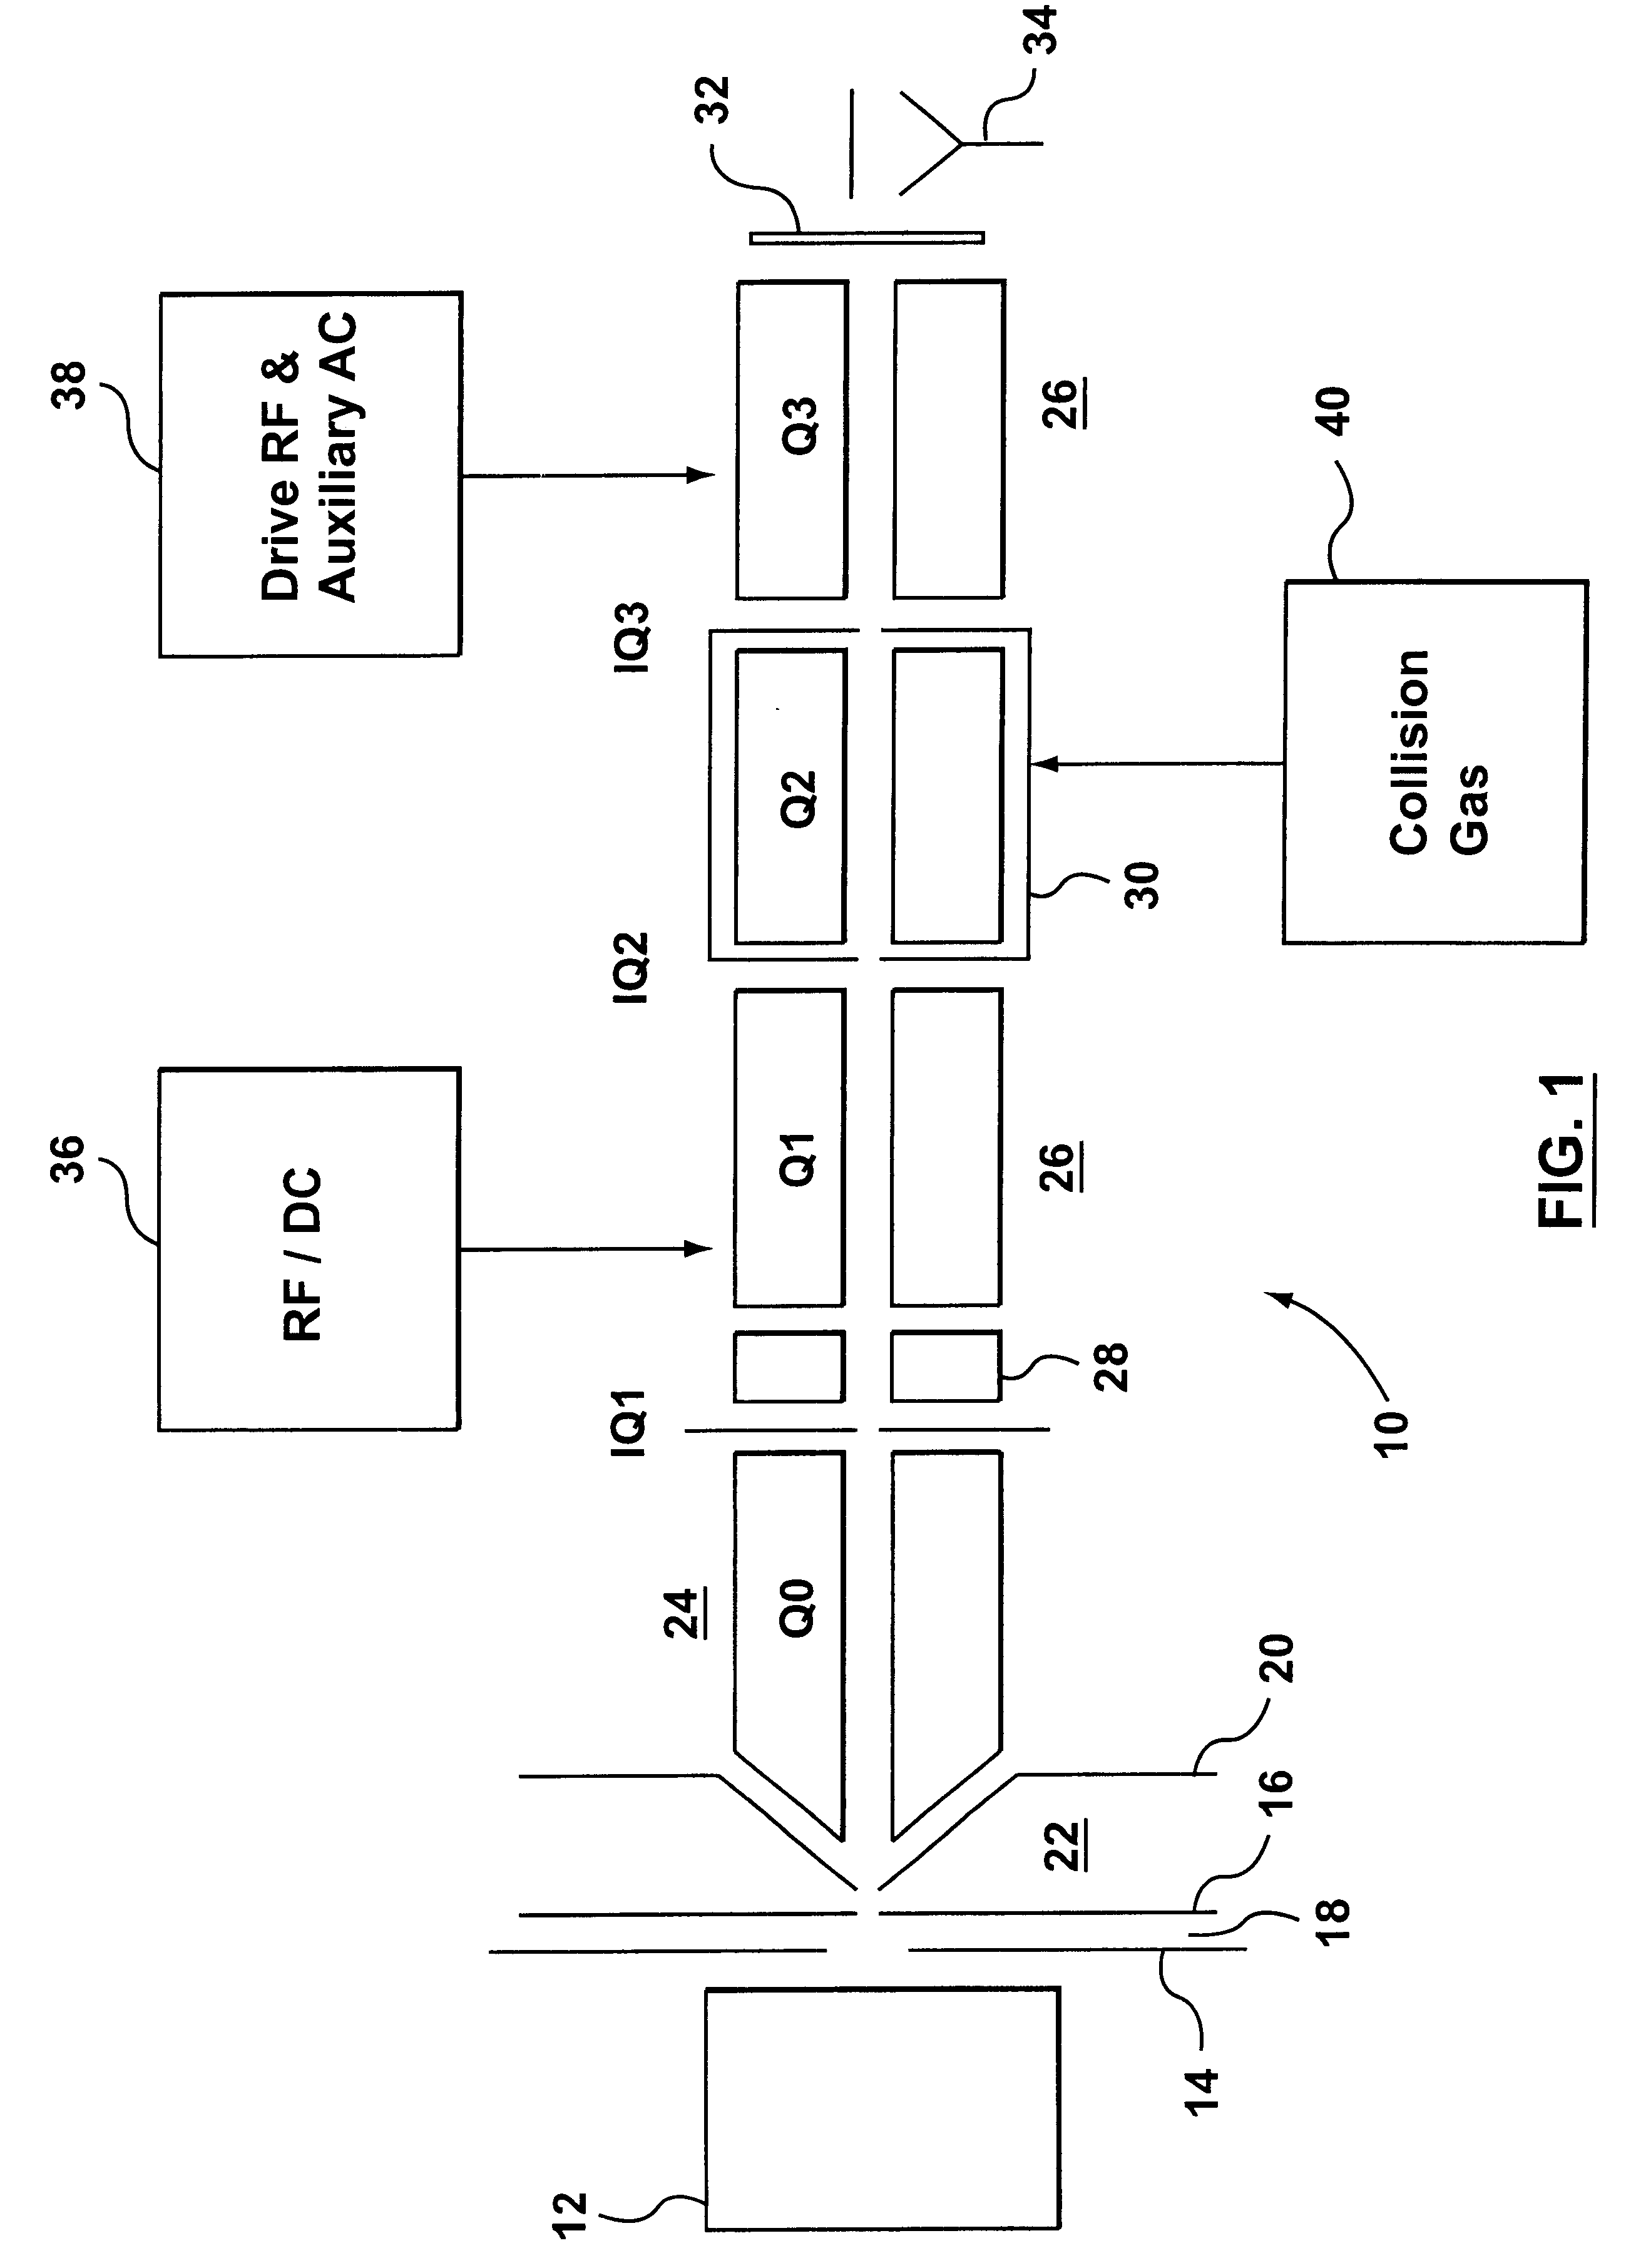 Method of reducing space charge in a linear ion trap mass spectrometer